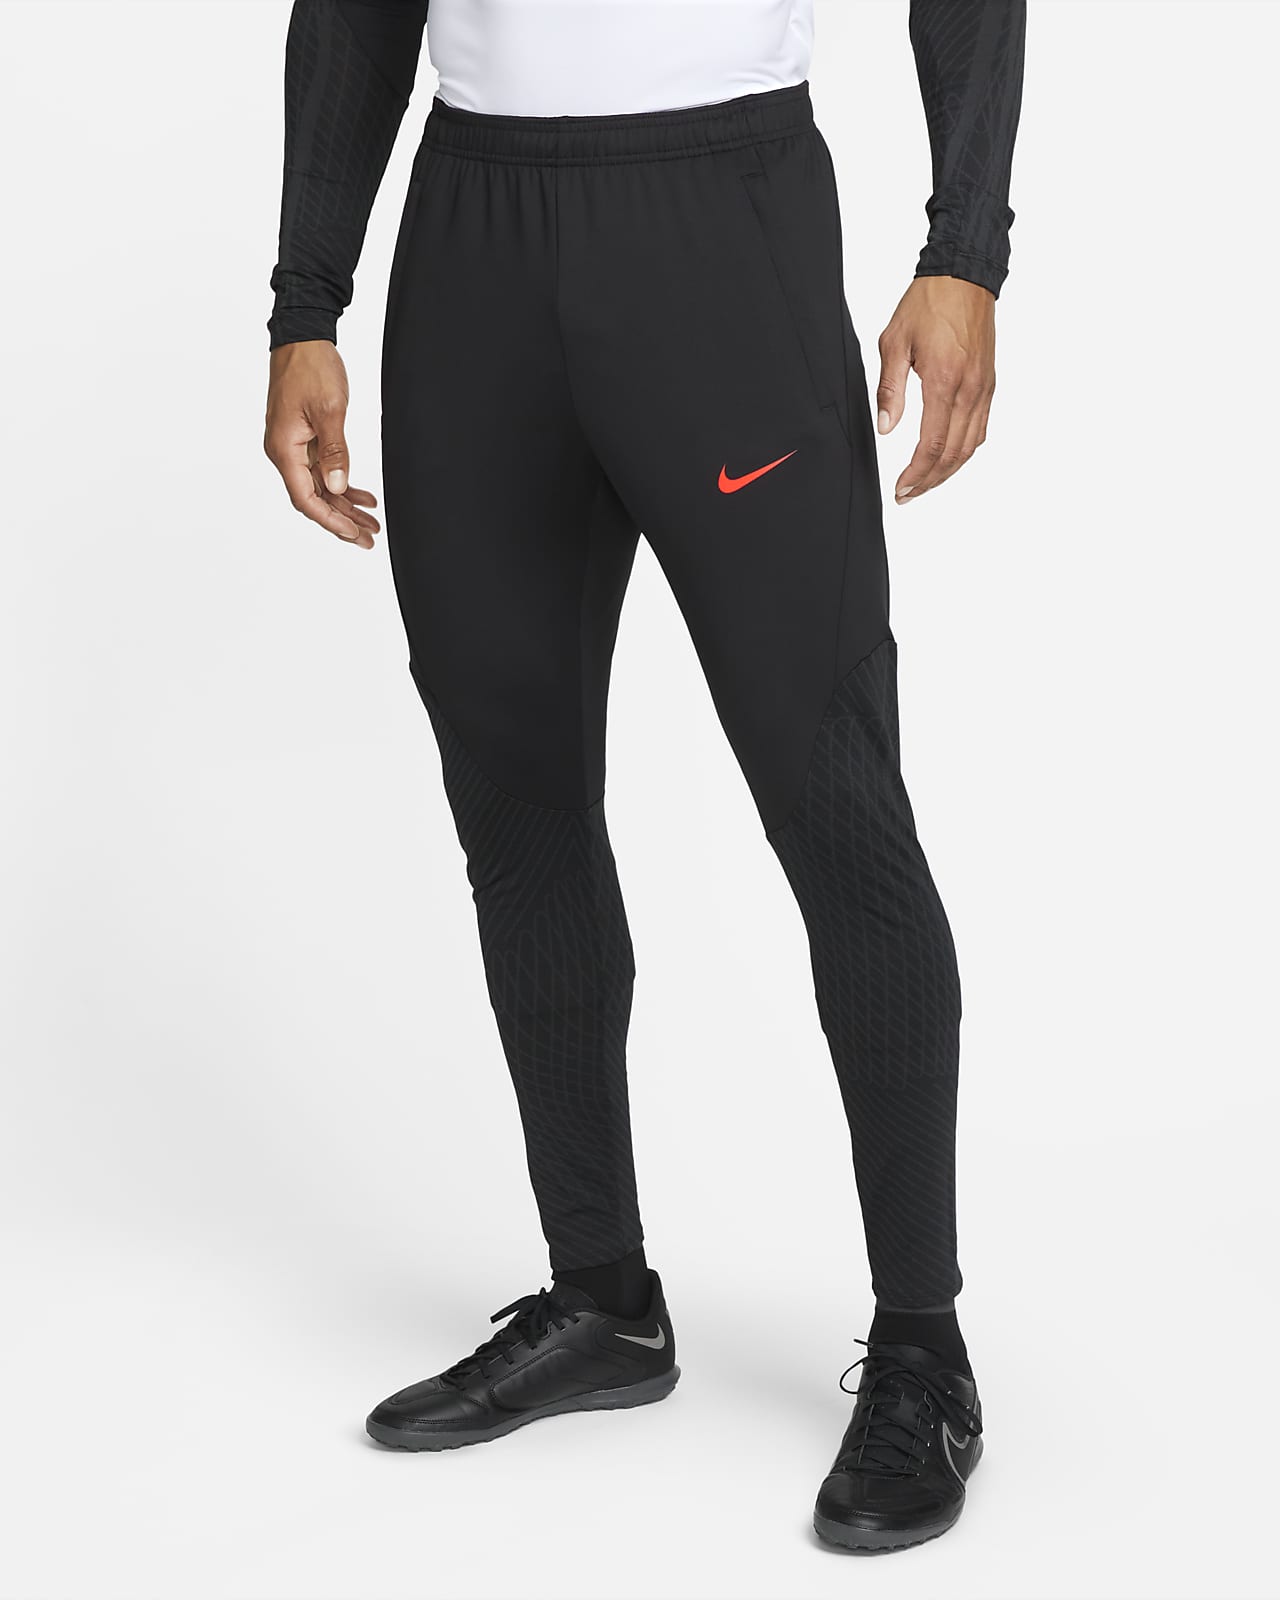 Nike Team Velocity Adult  Recruit Youth Football Pants ALL SIZES AND  COLORS  eBay